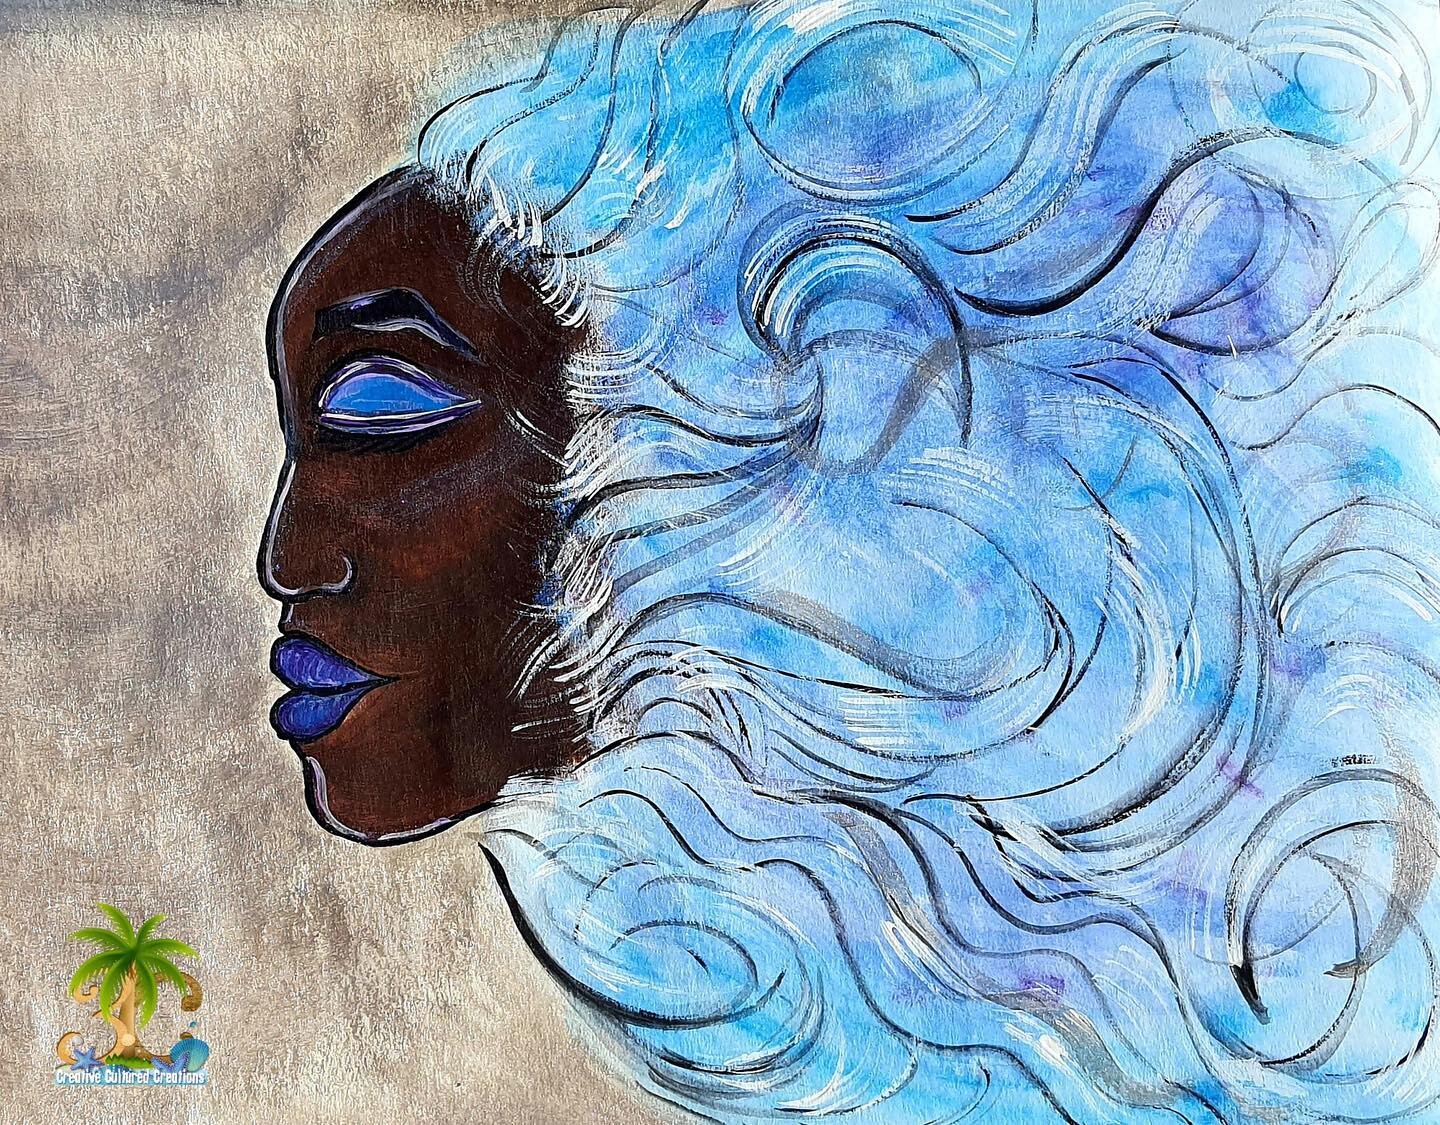 The Wind Goddess the final sister of the Goddesses of Nature by Tricia King. She is the twin of the Water Goddess, painted in acrylic in a silvery grey background her lips are a deep deep blue and her hair is a sky blue that mimics the whirl of the w